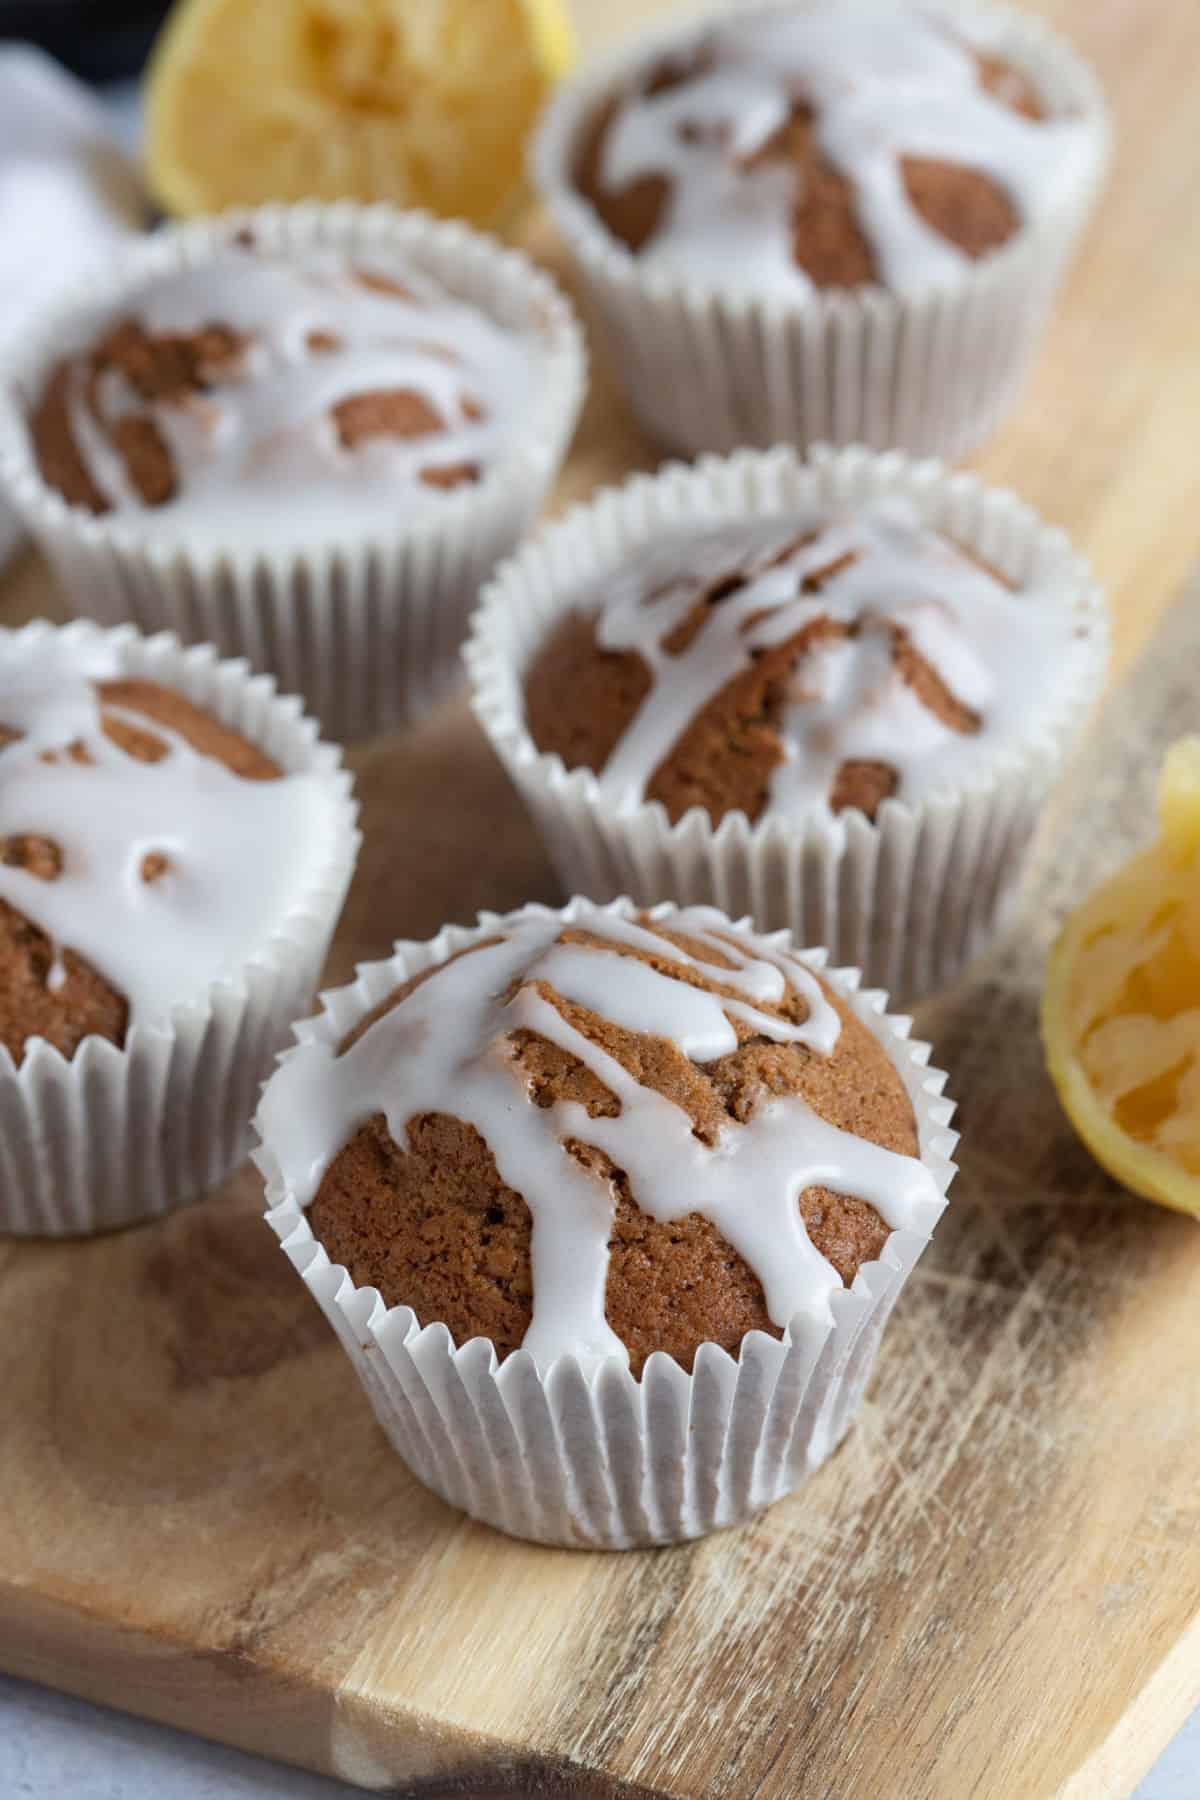 Gingerbread muffins on a wooden board.